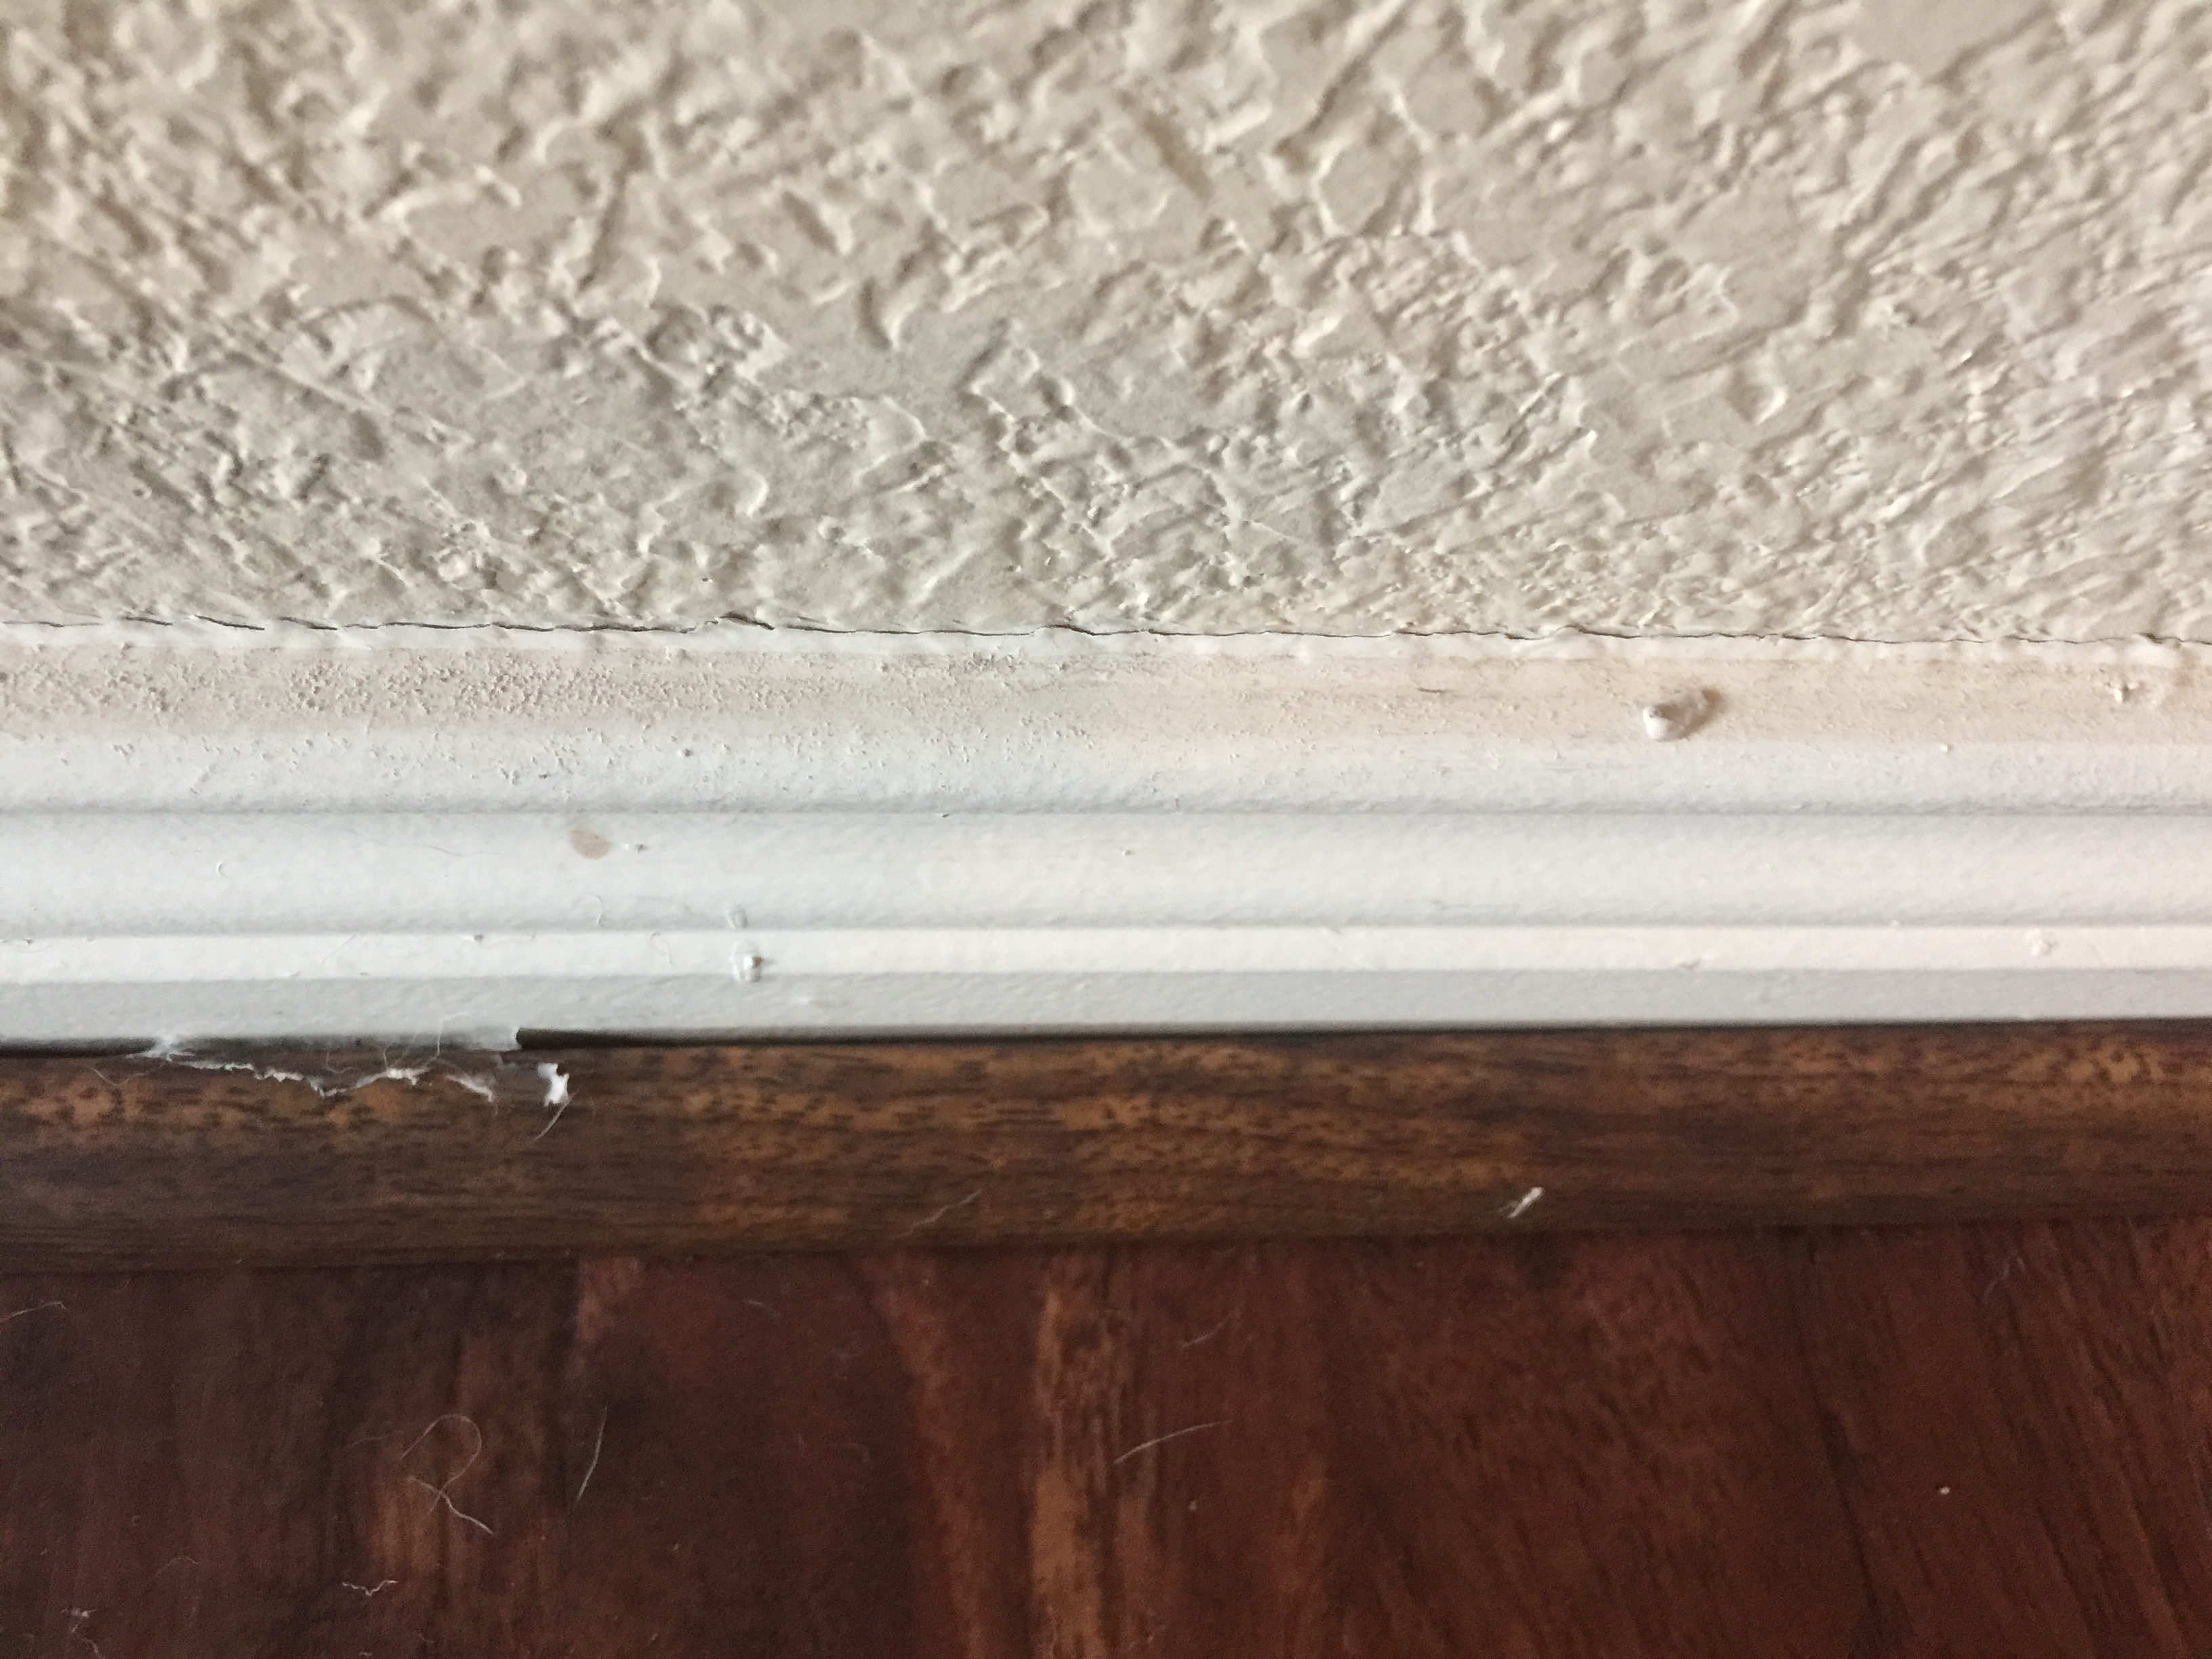 Trim glued to wall with glue showing